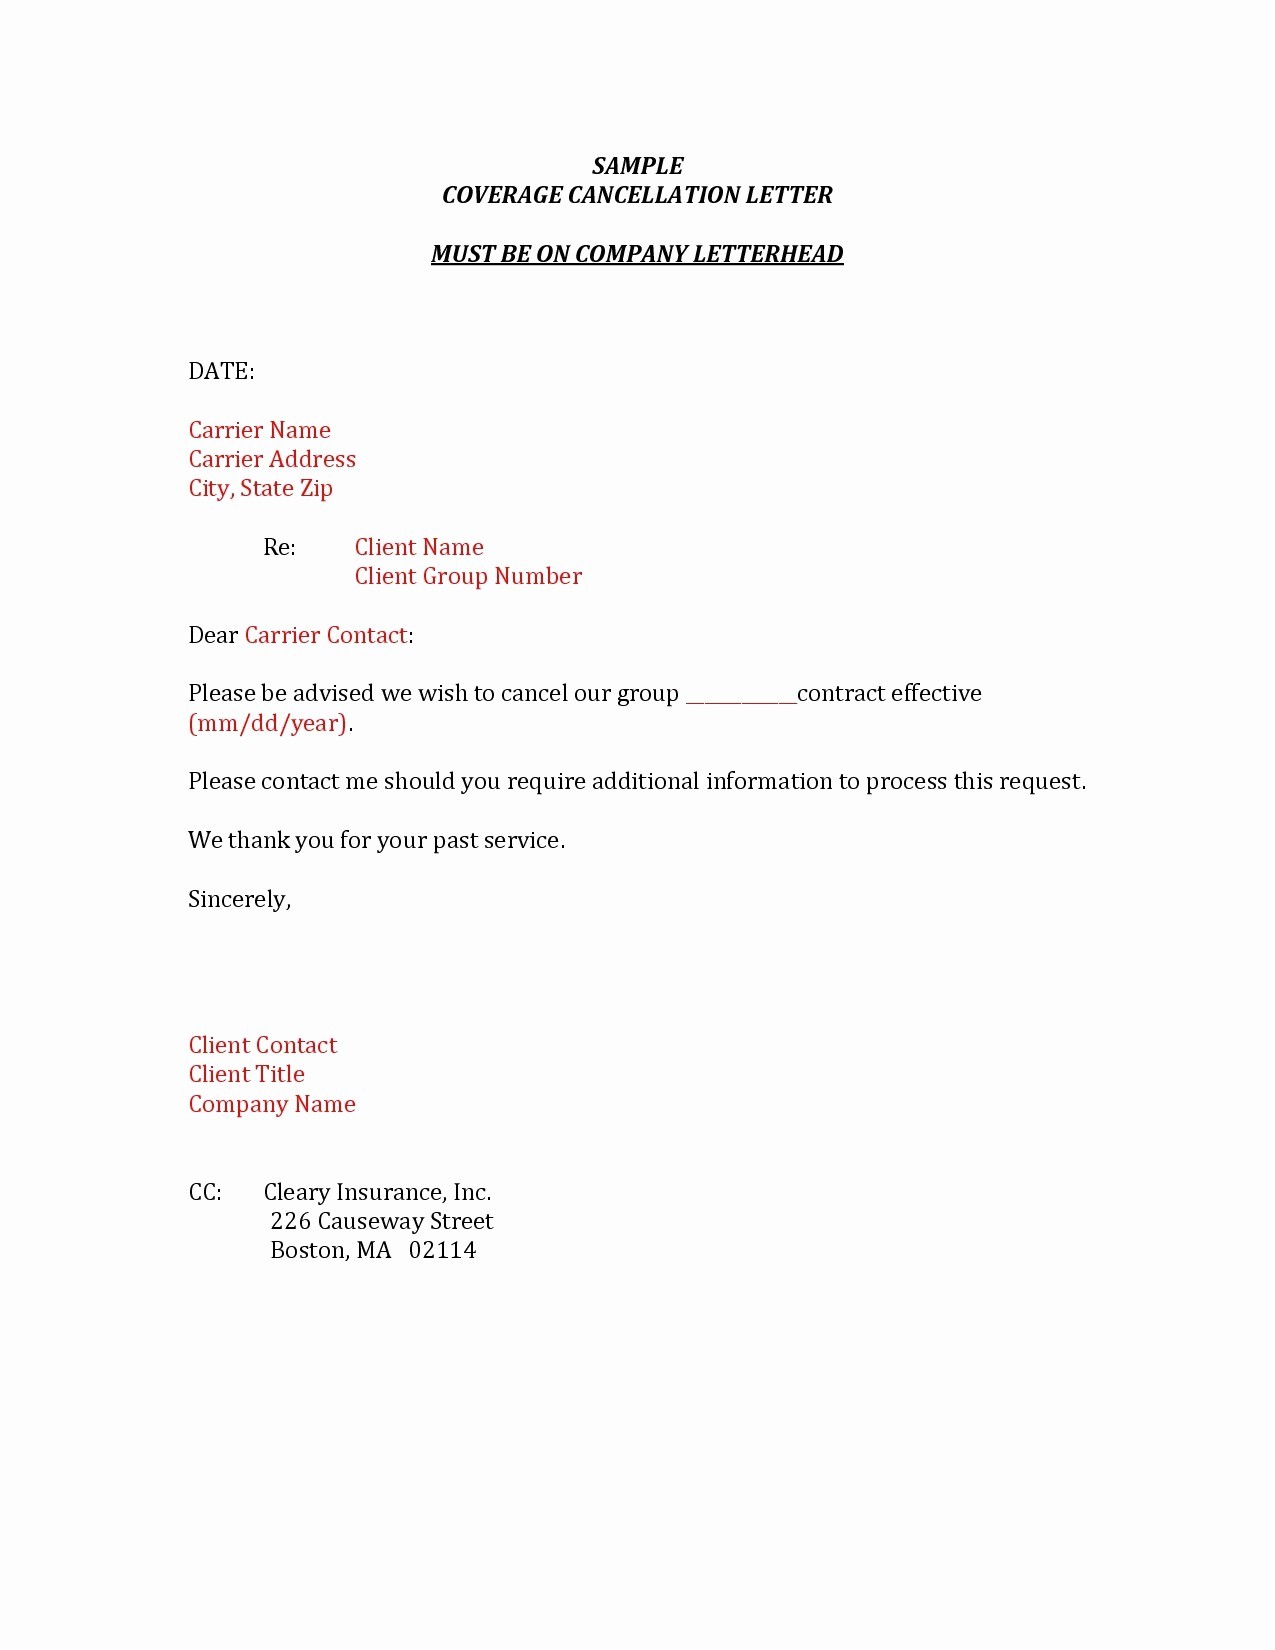 Letter Format Of Cancellation Save Insurance Document Car Sample